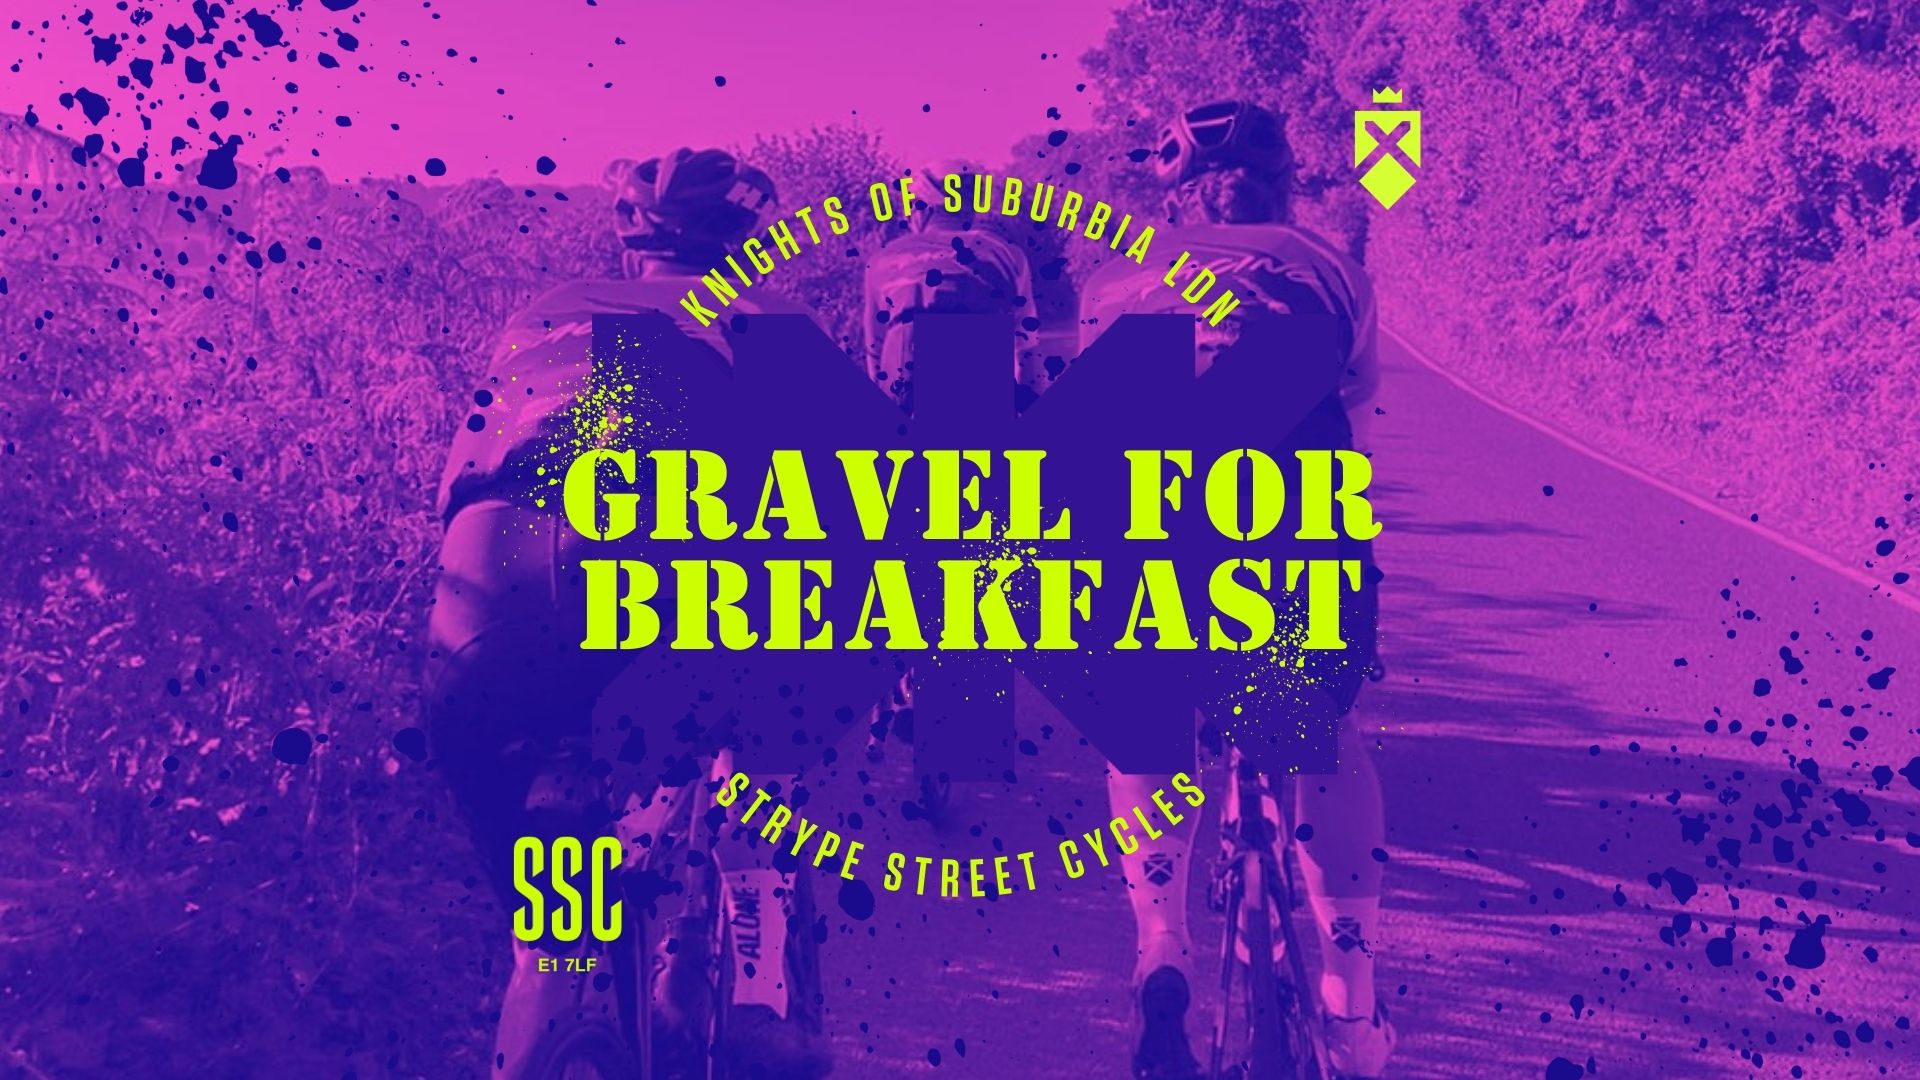 Gravel For Breakfast Bunch Ride Knights Of Suburbia